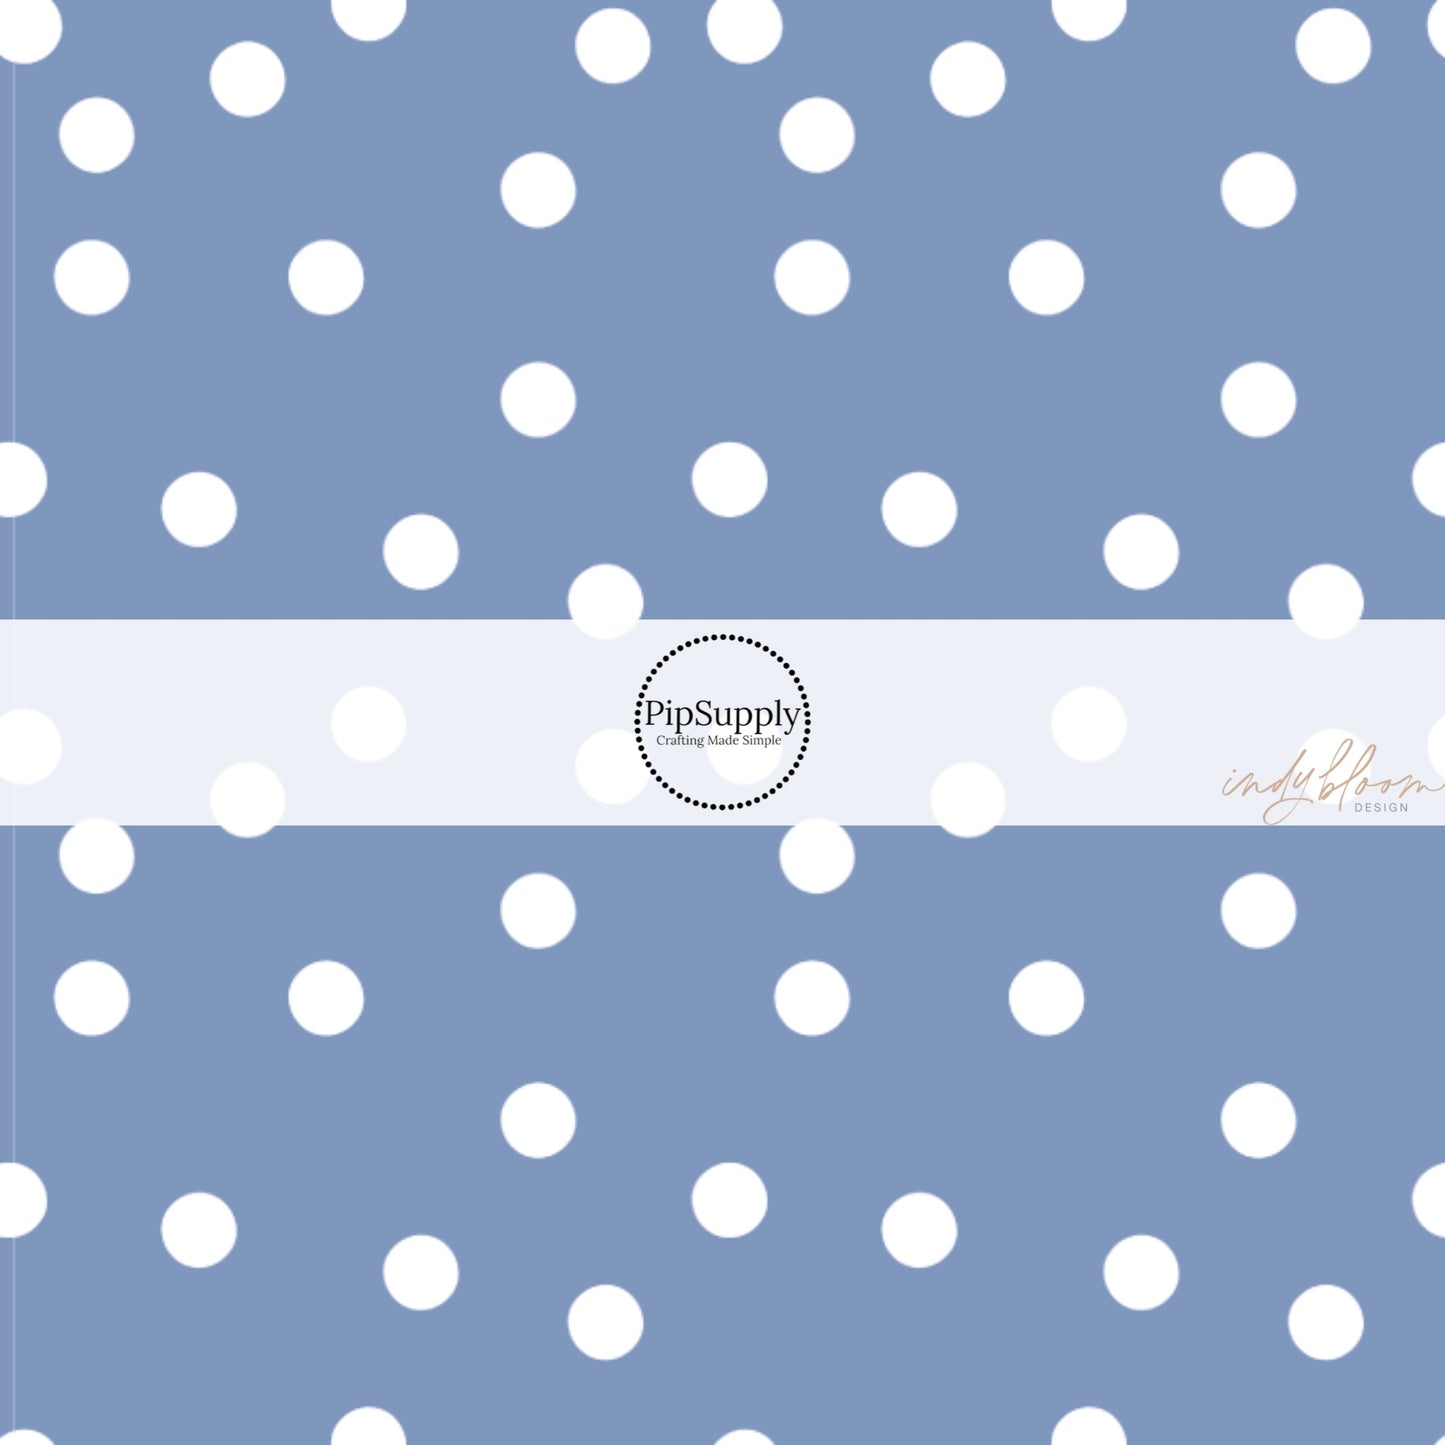 This summer fabric by the yard features cream dots on blue. This fun summer themed fabric can be used for all your sewing and crafting needs!